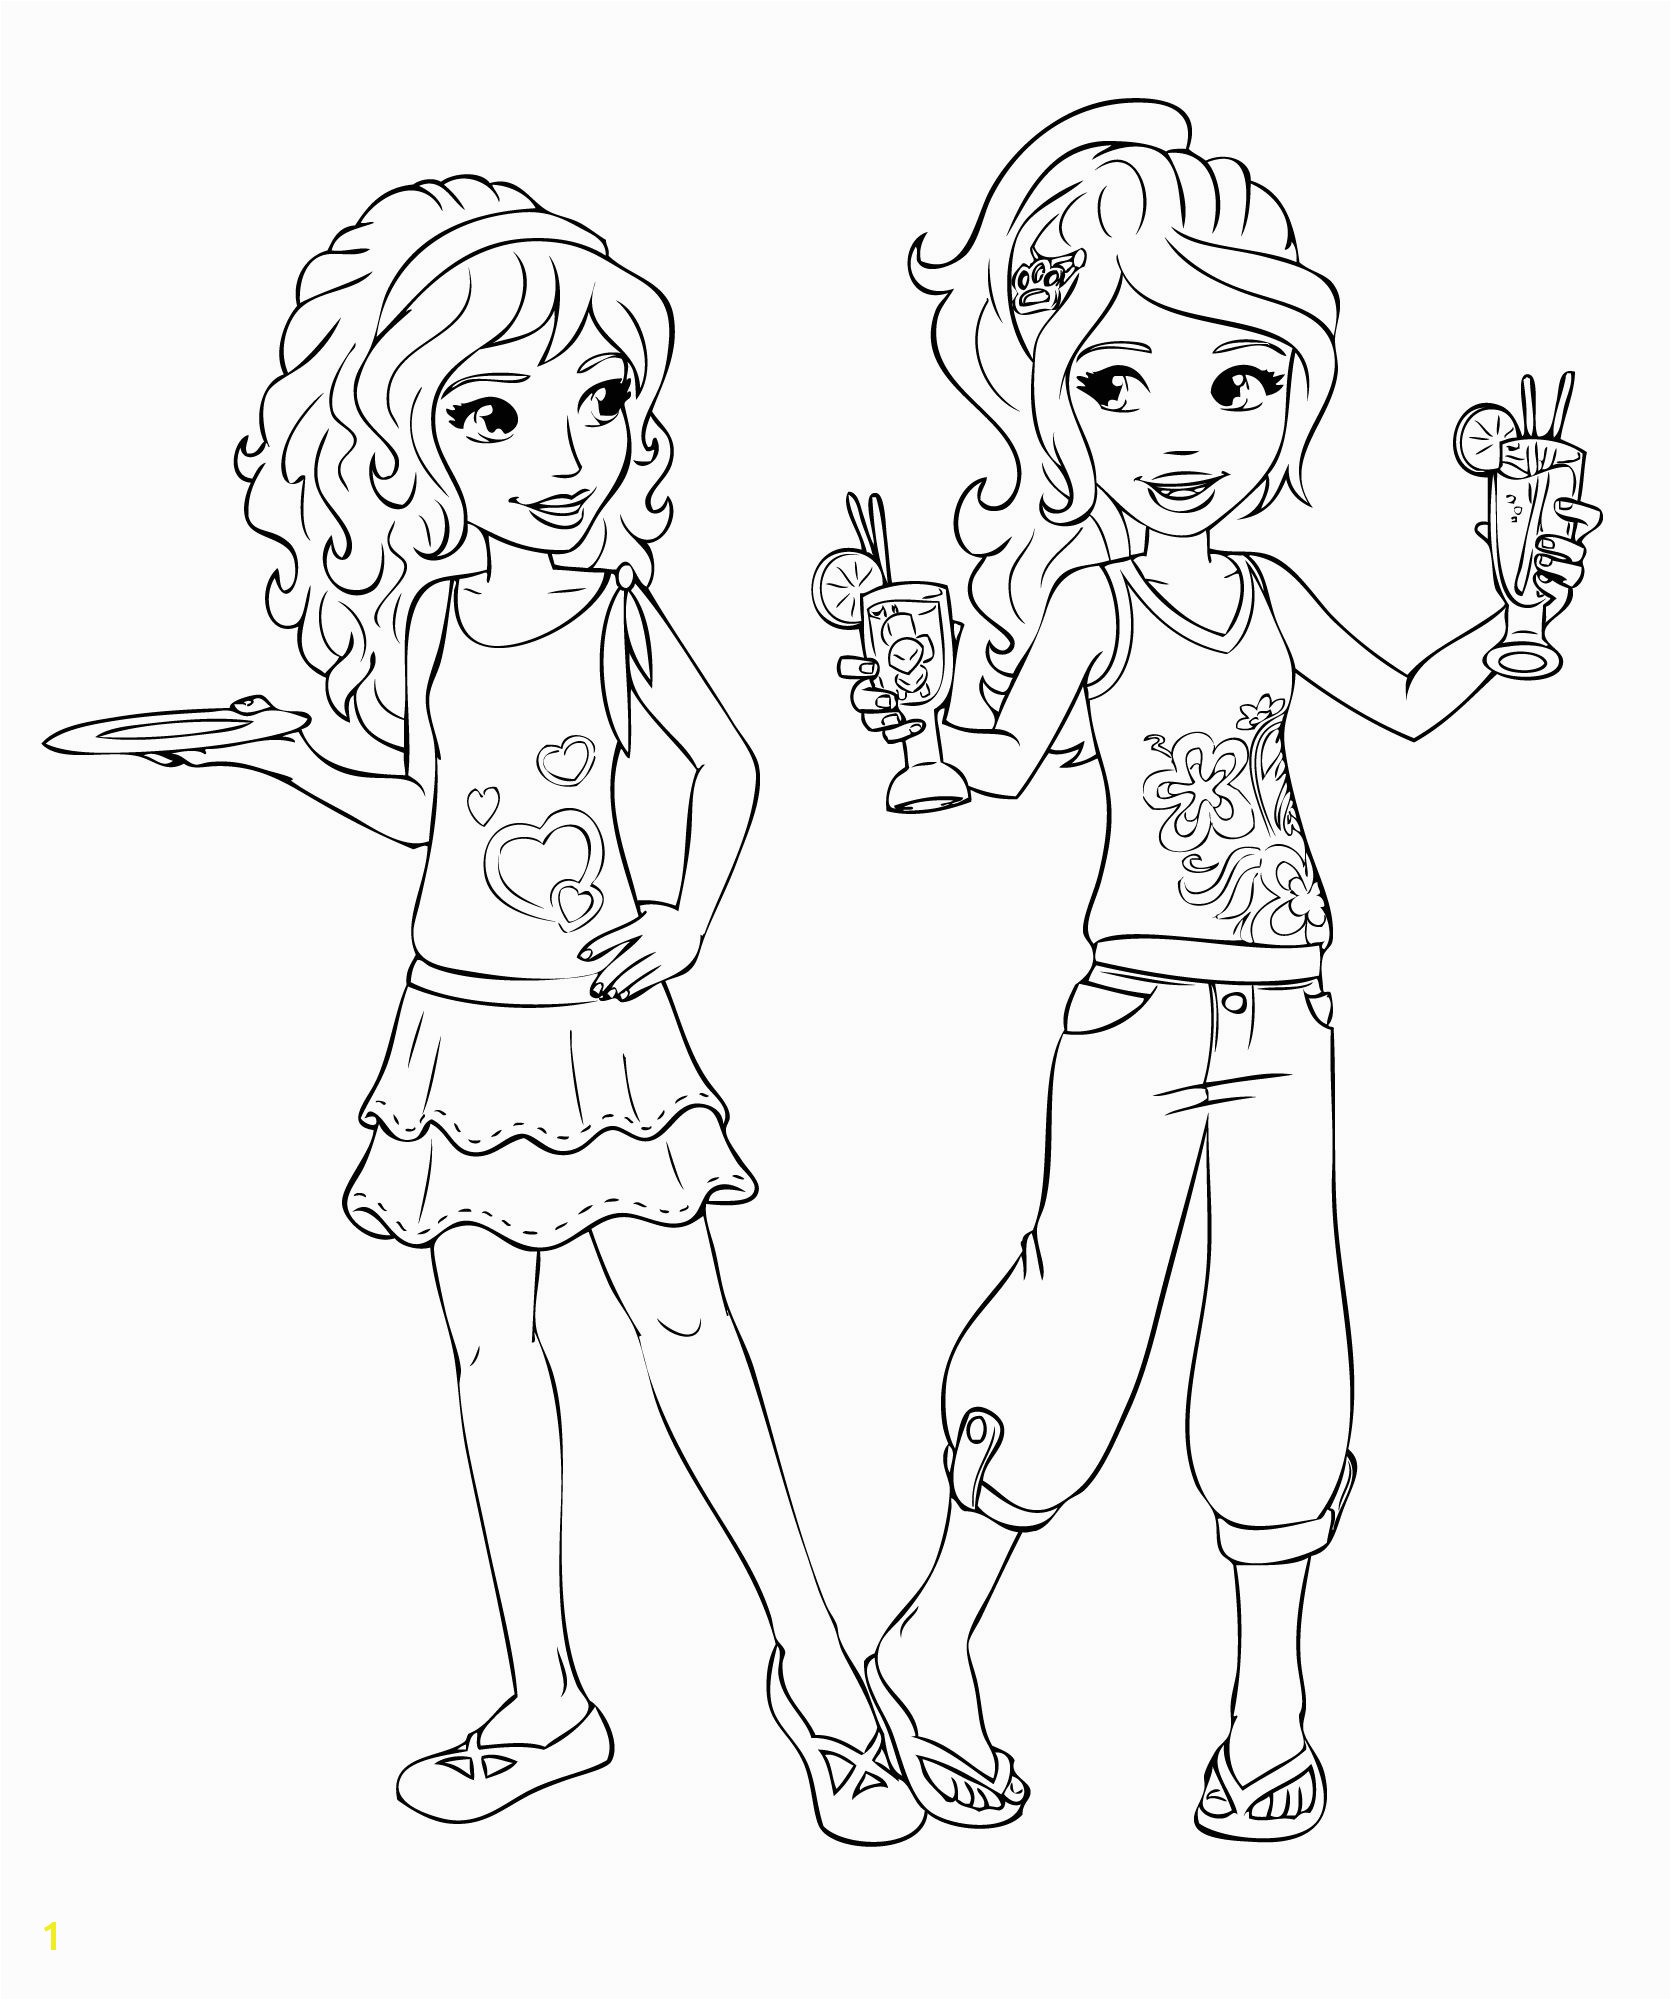 lego friends coloring pages tagged with best friends coloring pages